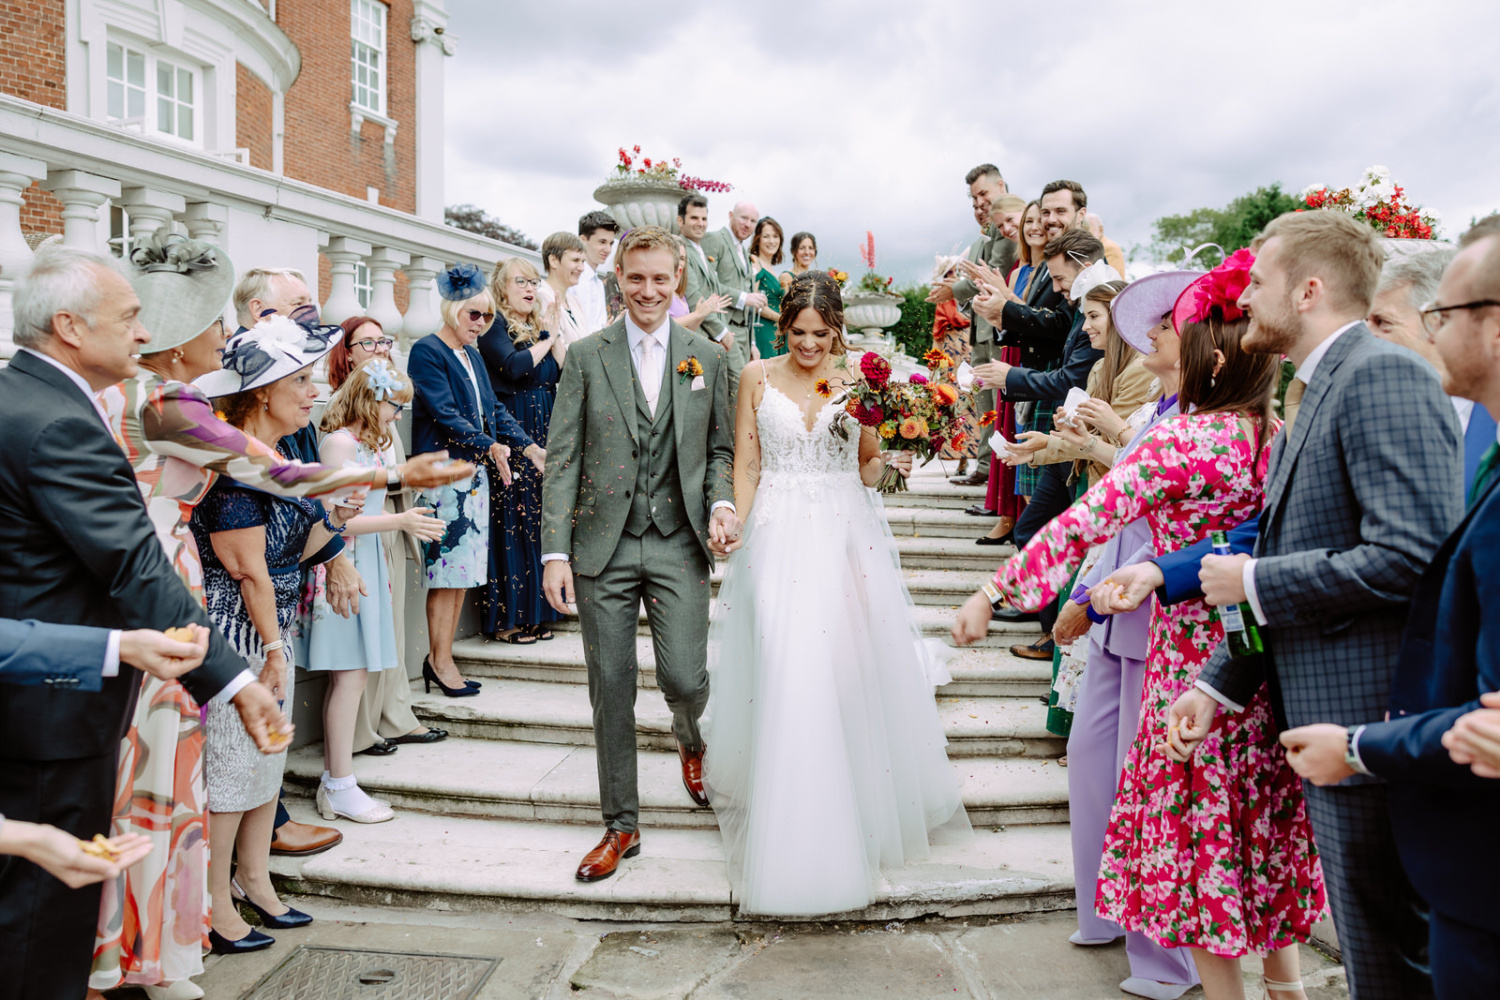 A bride and groom walking down the steps at a wedding. Guests throw confetti.